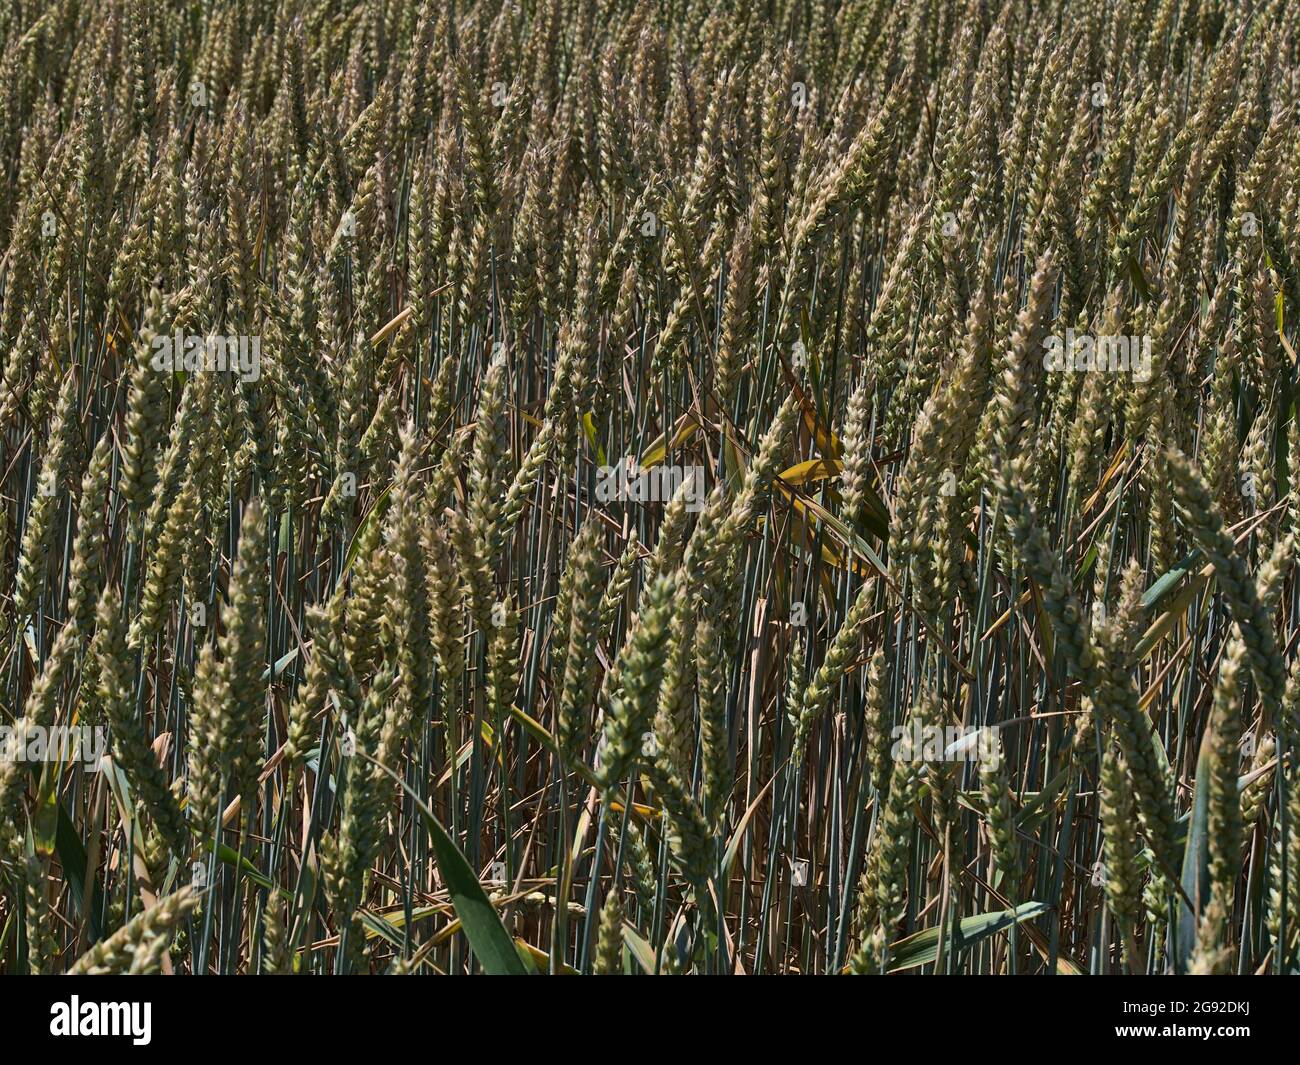 Closeup view of agricultural grain field with pattern of green and golden colored wheat plants (triticum aestivum) in summer near Abstatt, Germany. Stock Photo